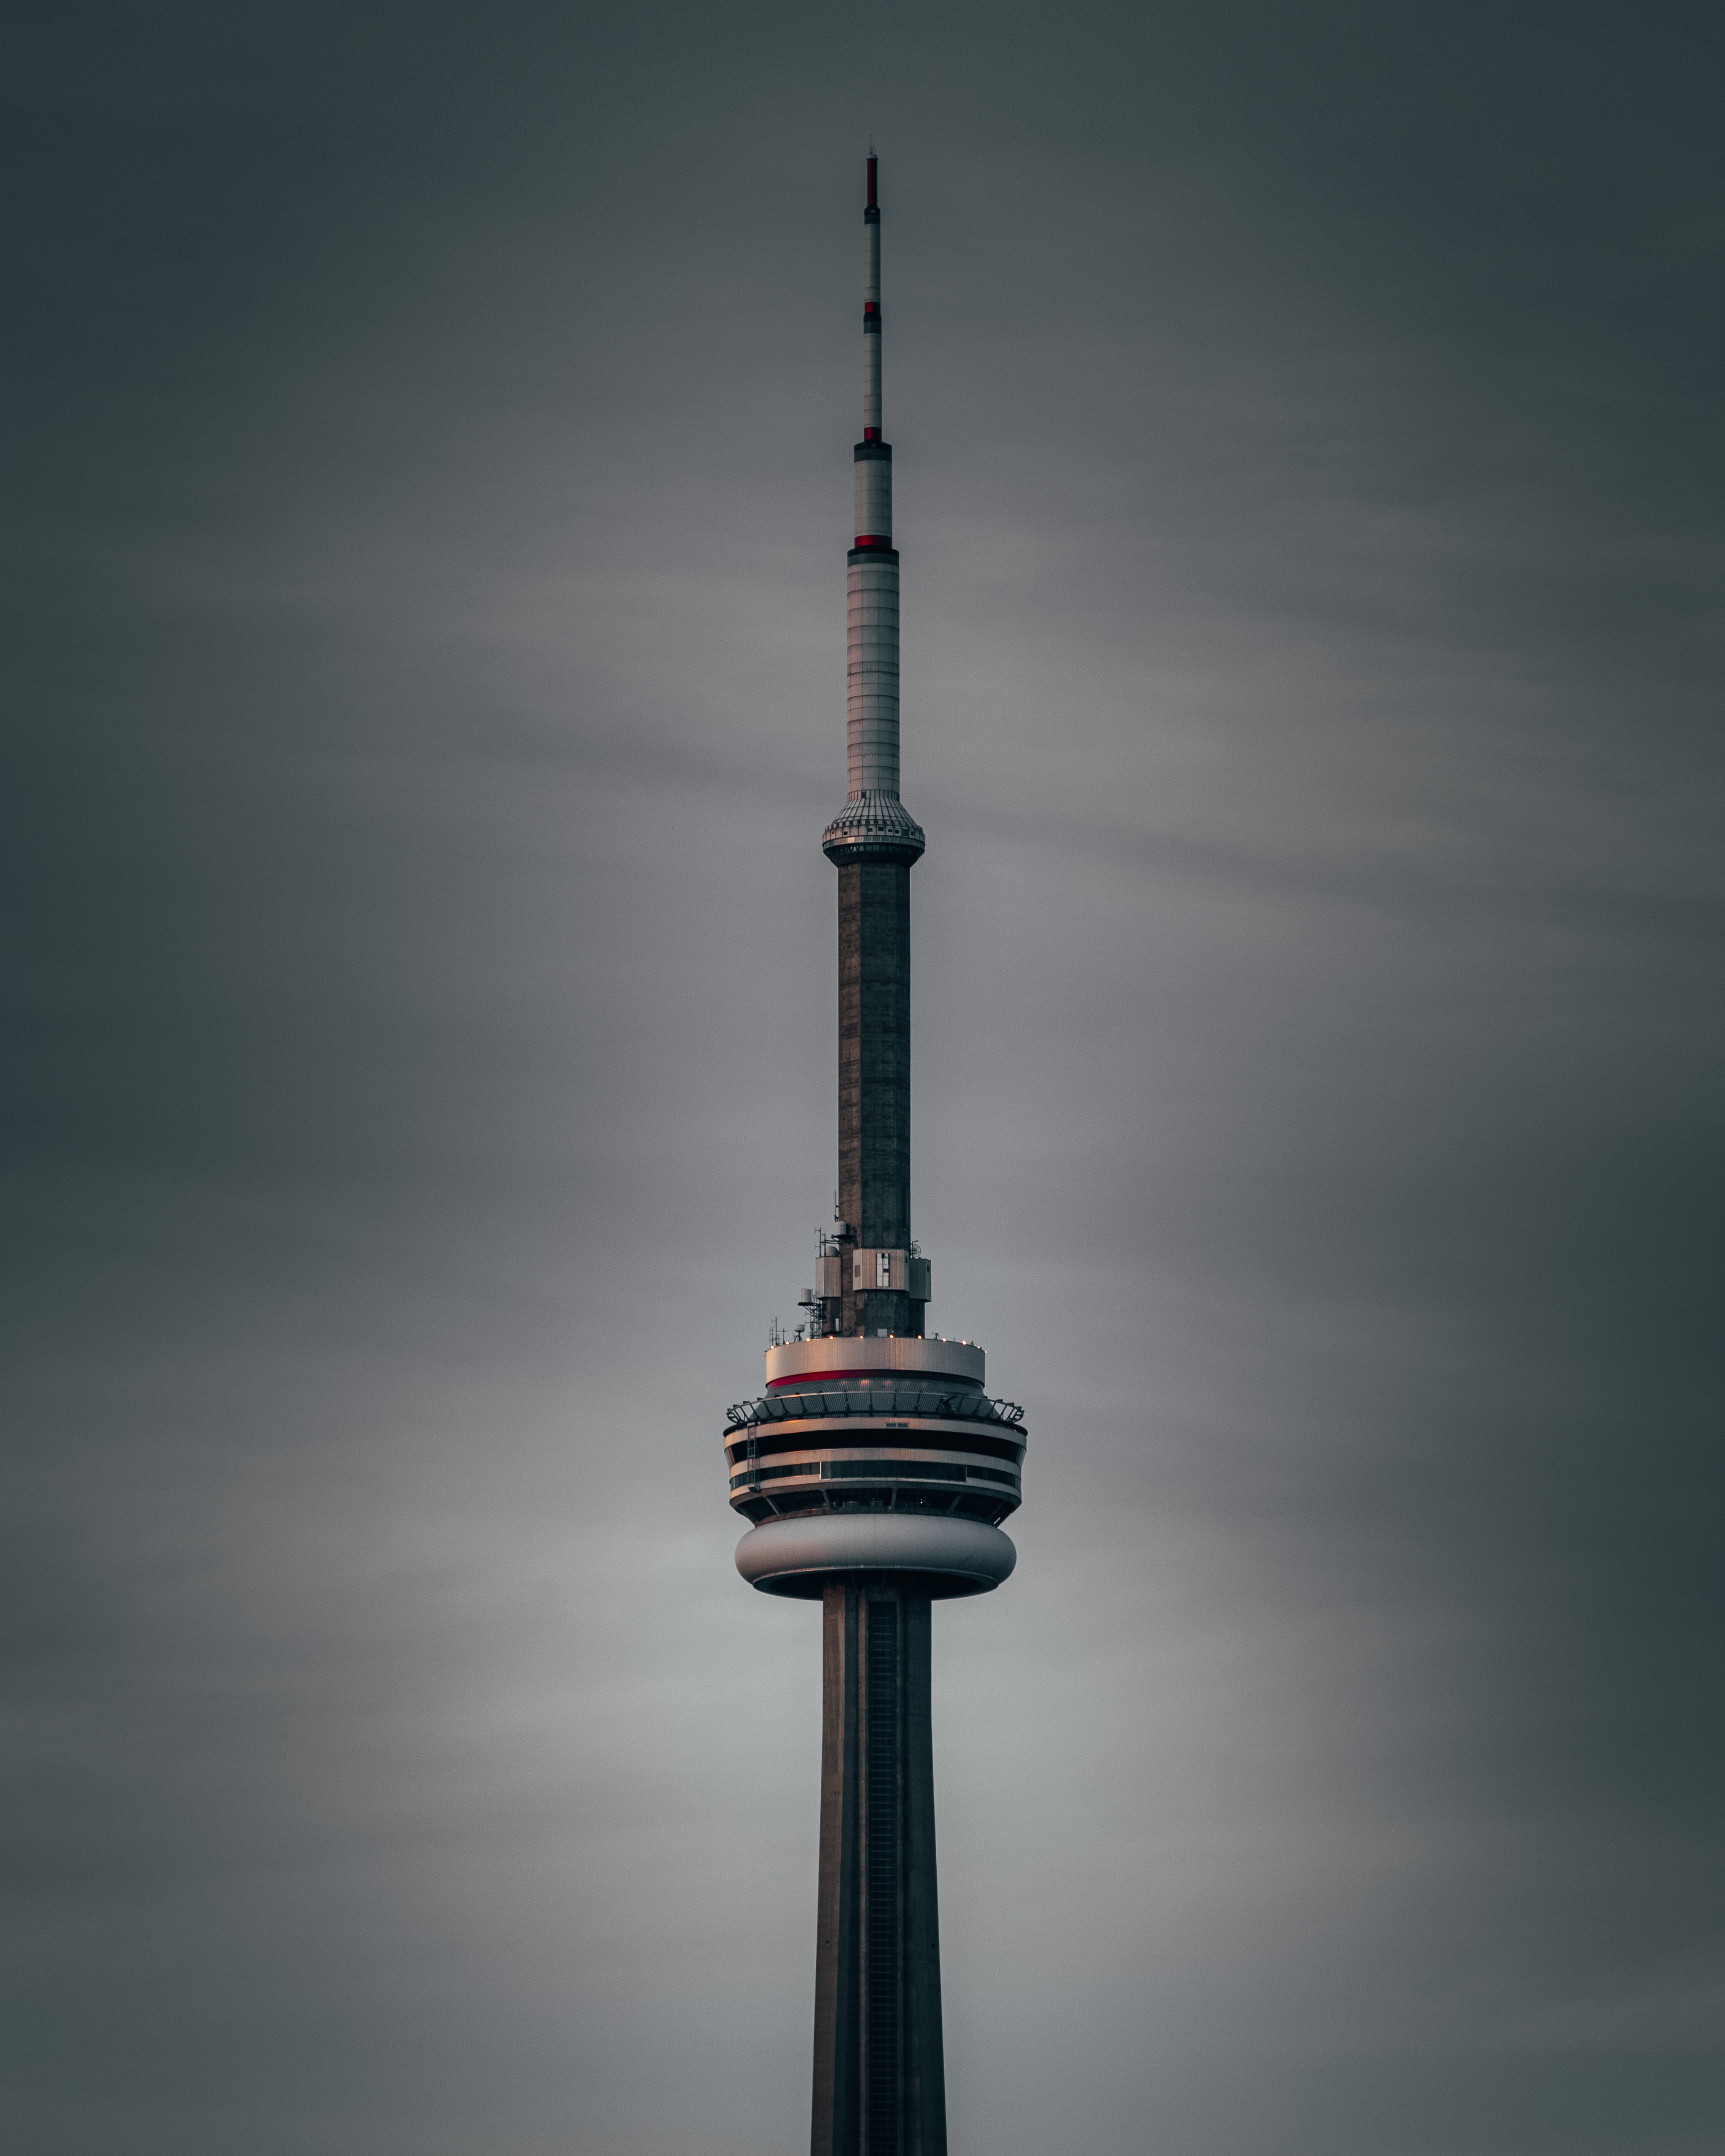 canada, toronto, building, architecture, miscellanea, miscellaneous, tower, modern, up to date 1080p